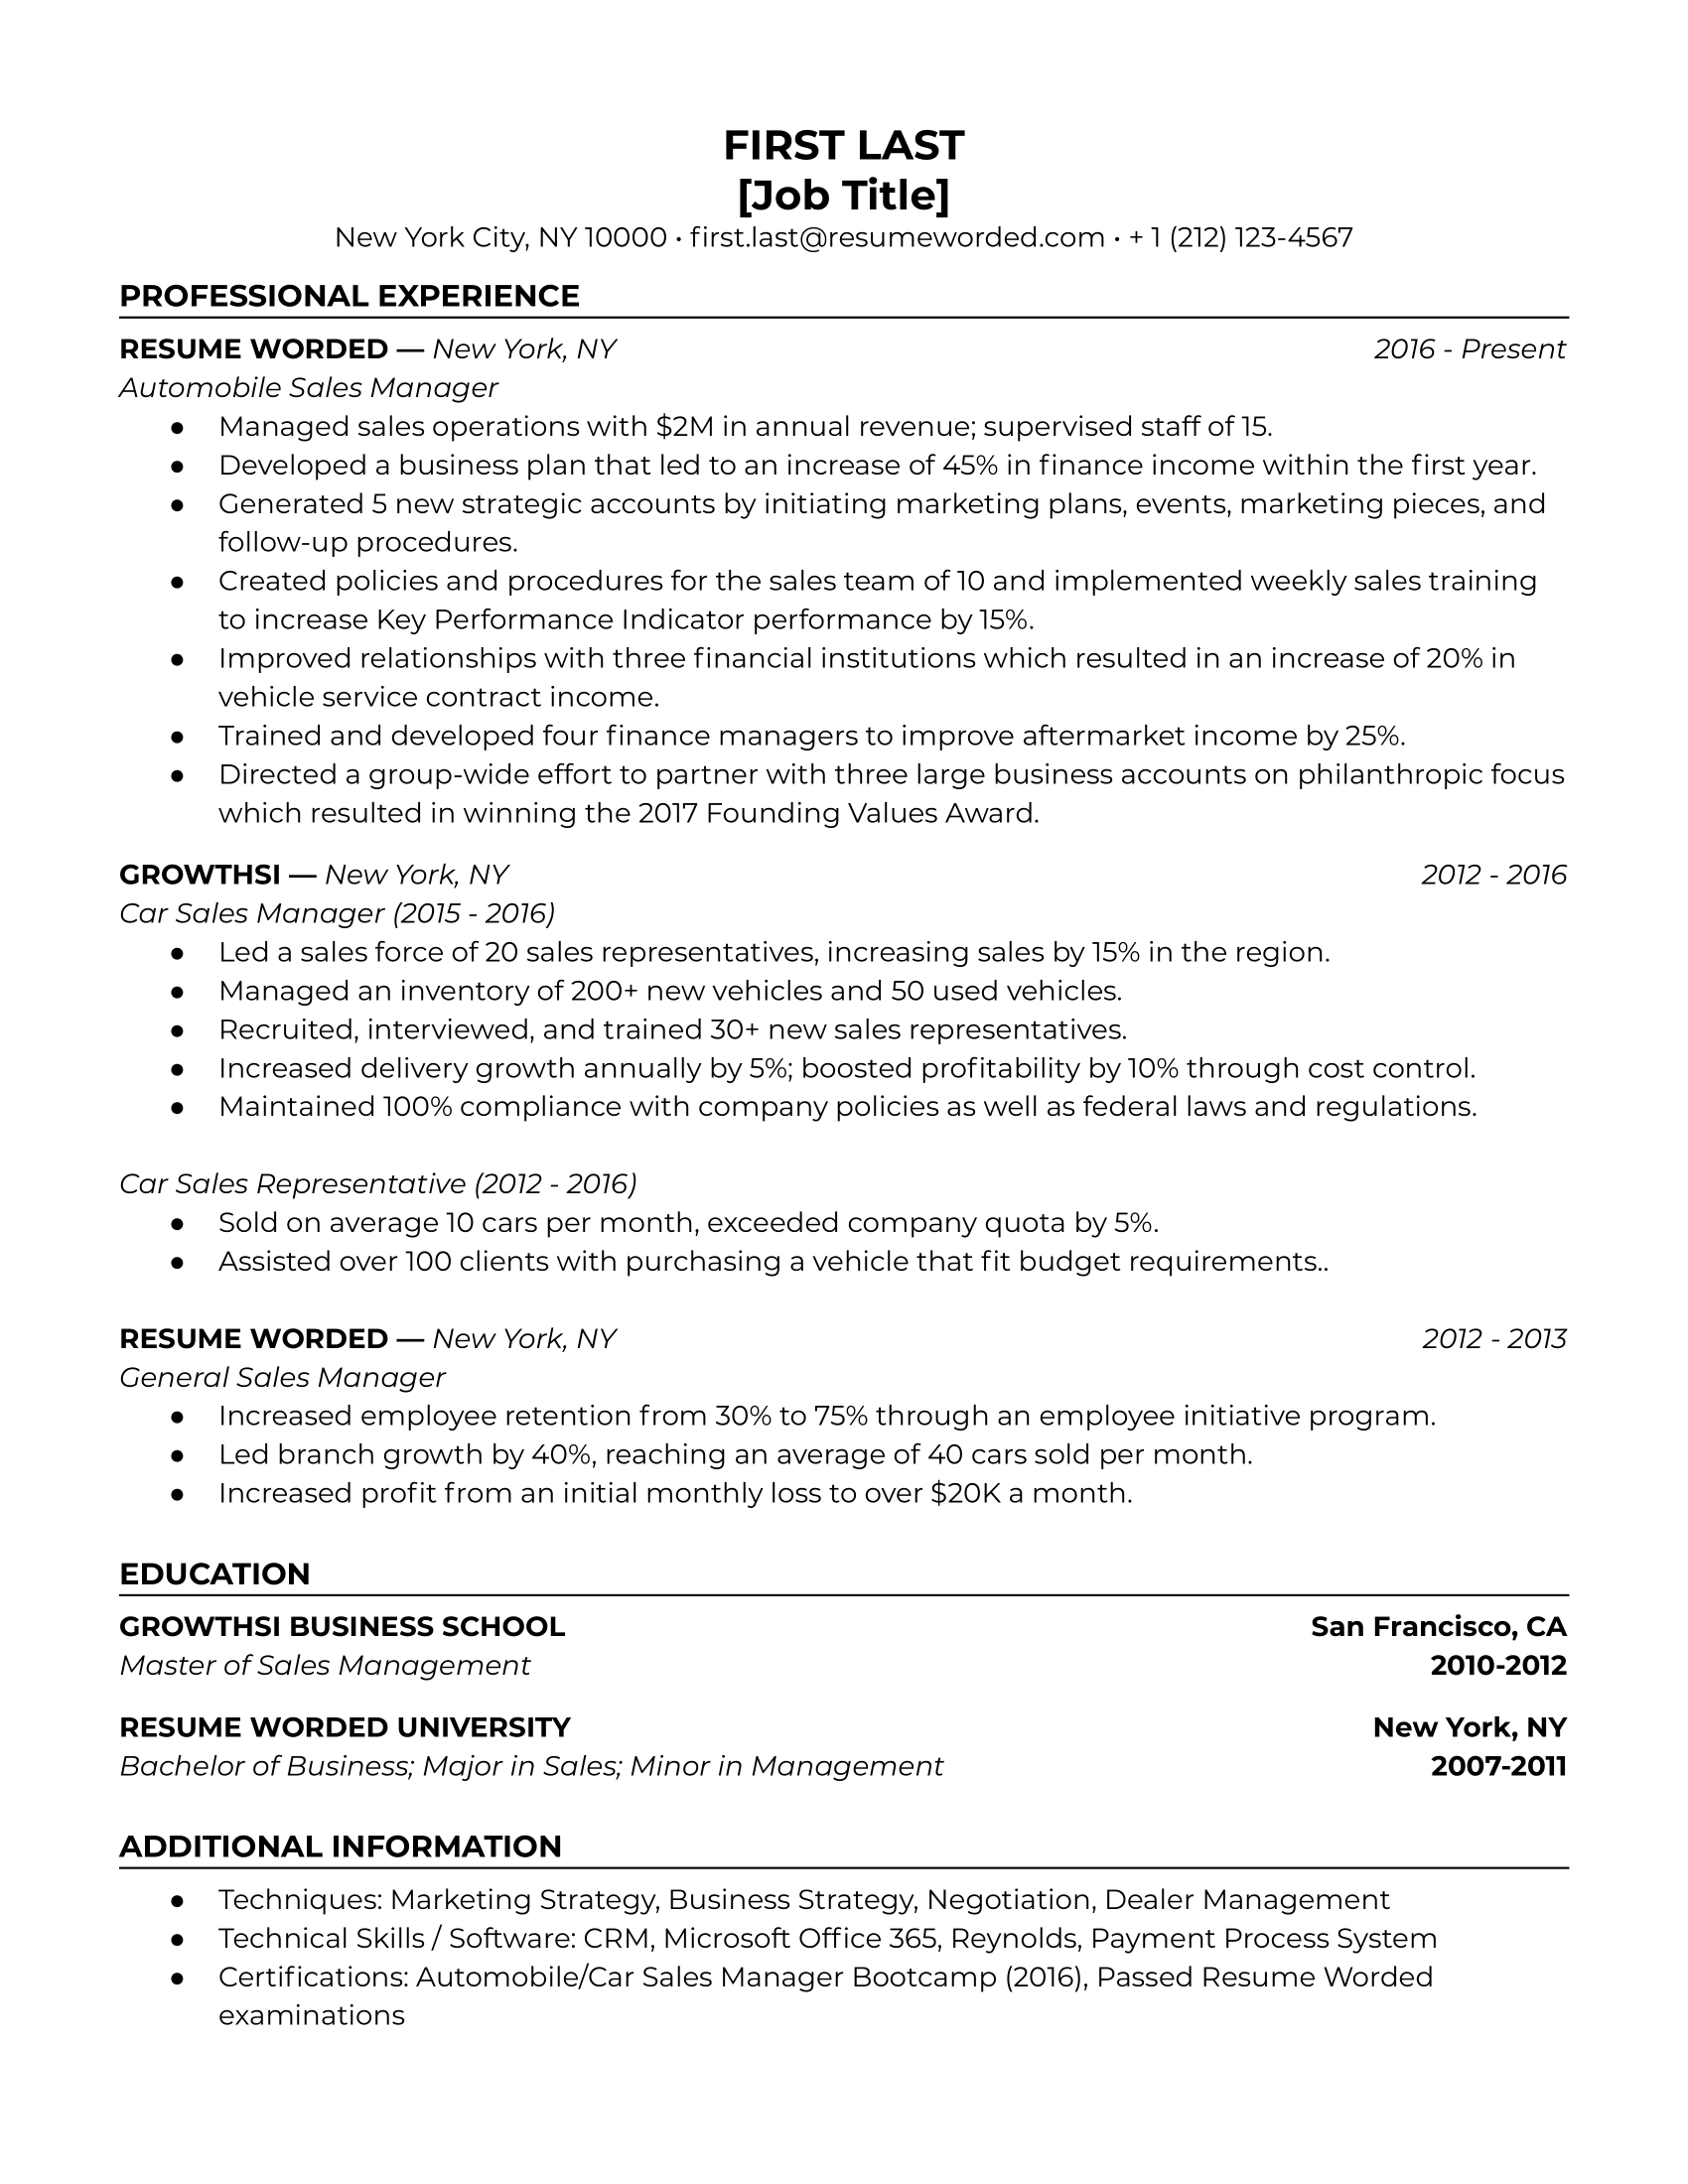 A neatly structured CV for Automobile / Car Sales Manager role.